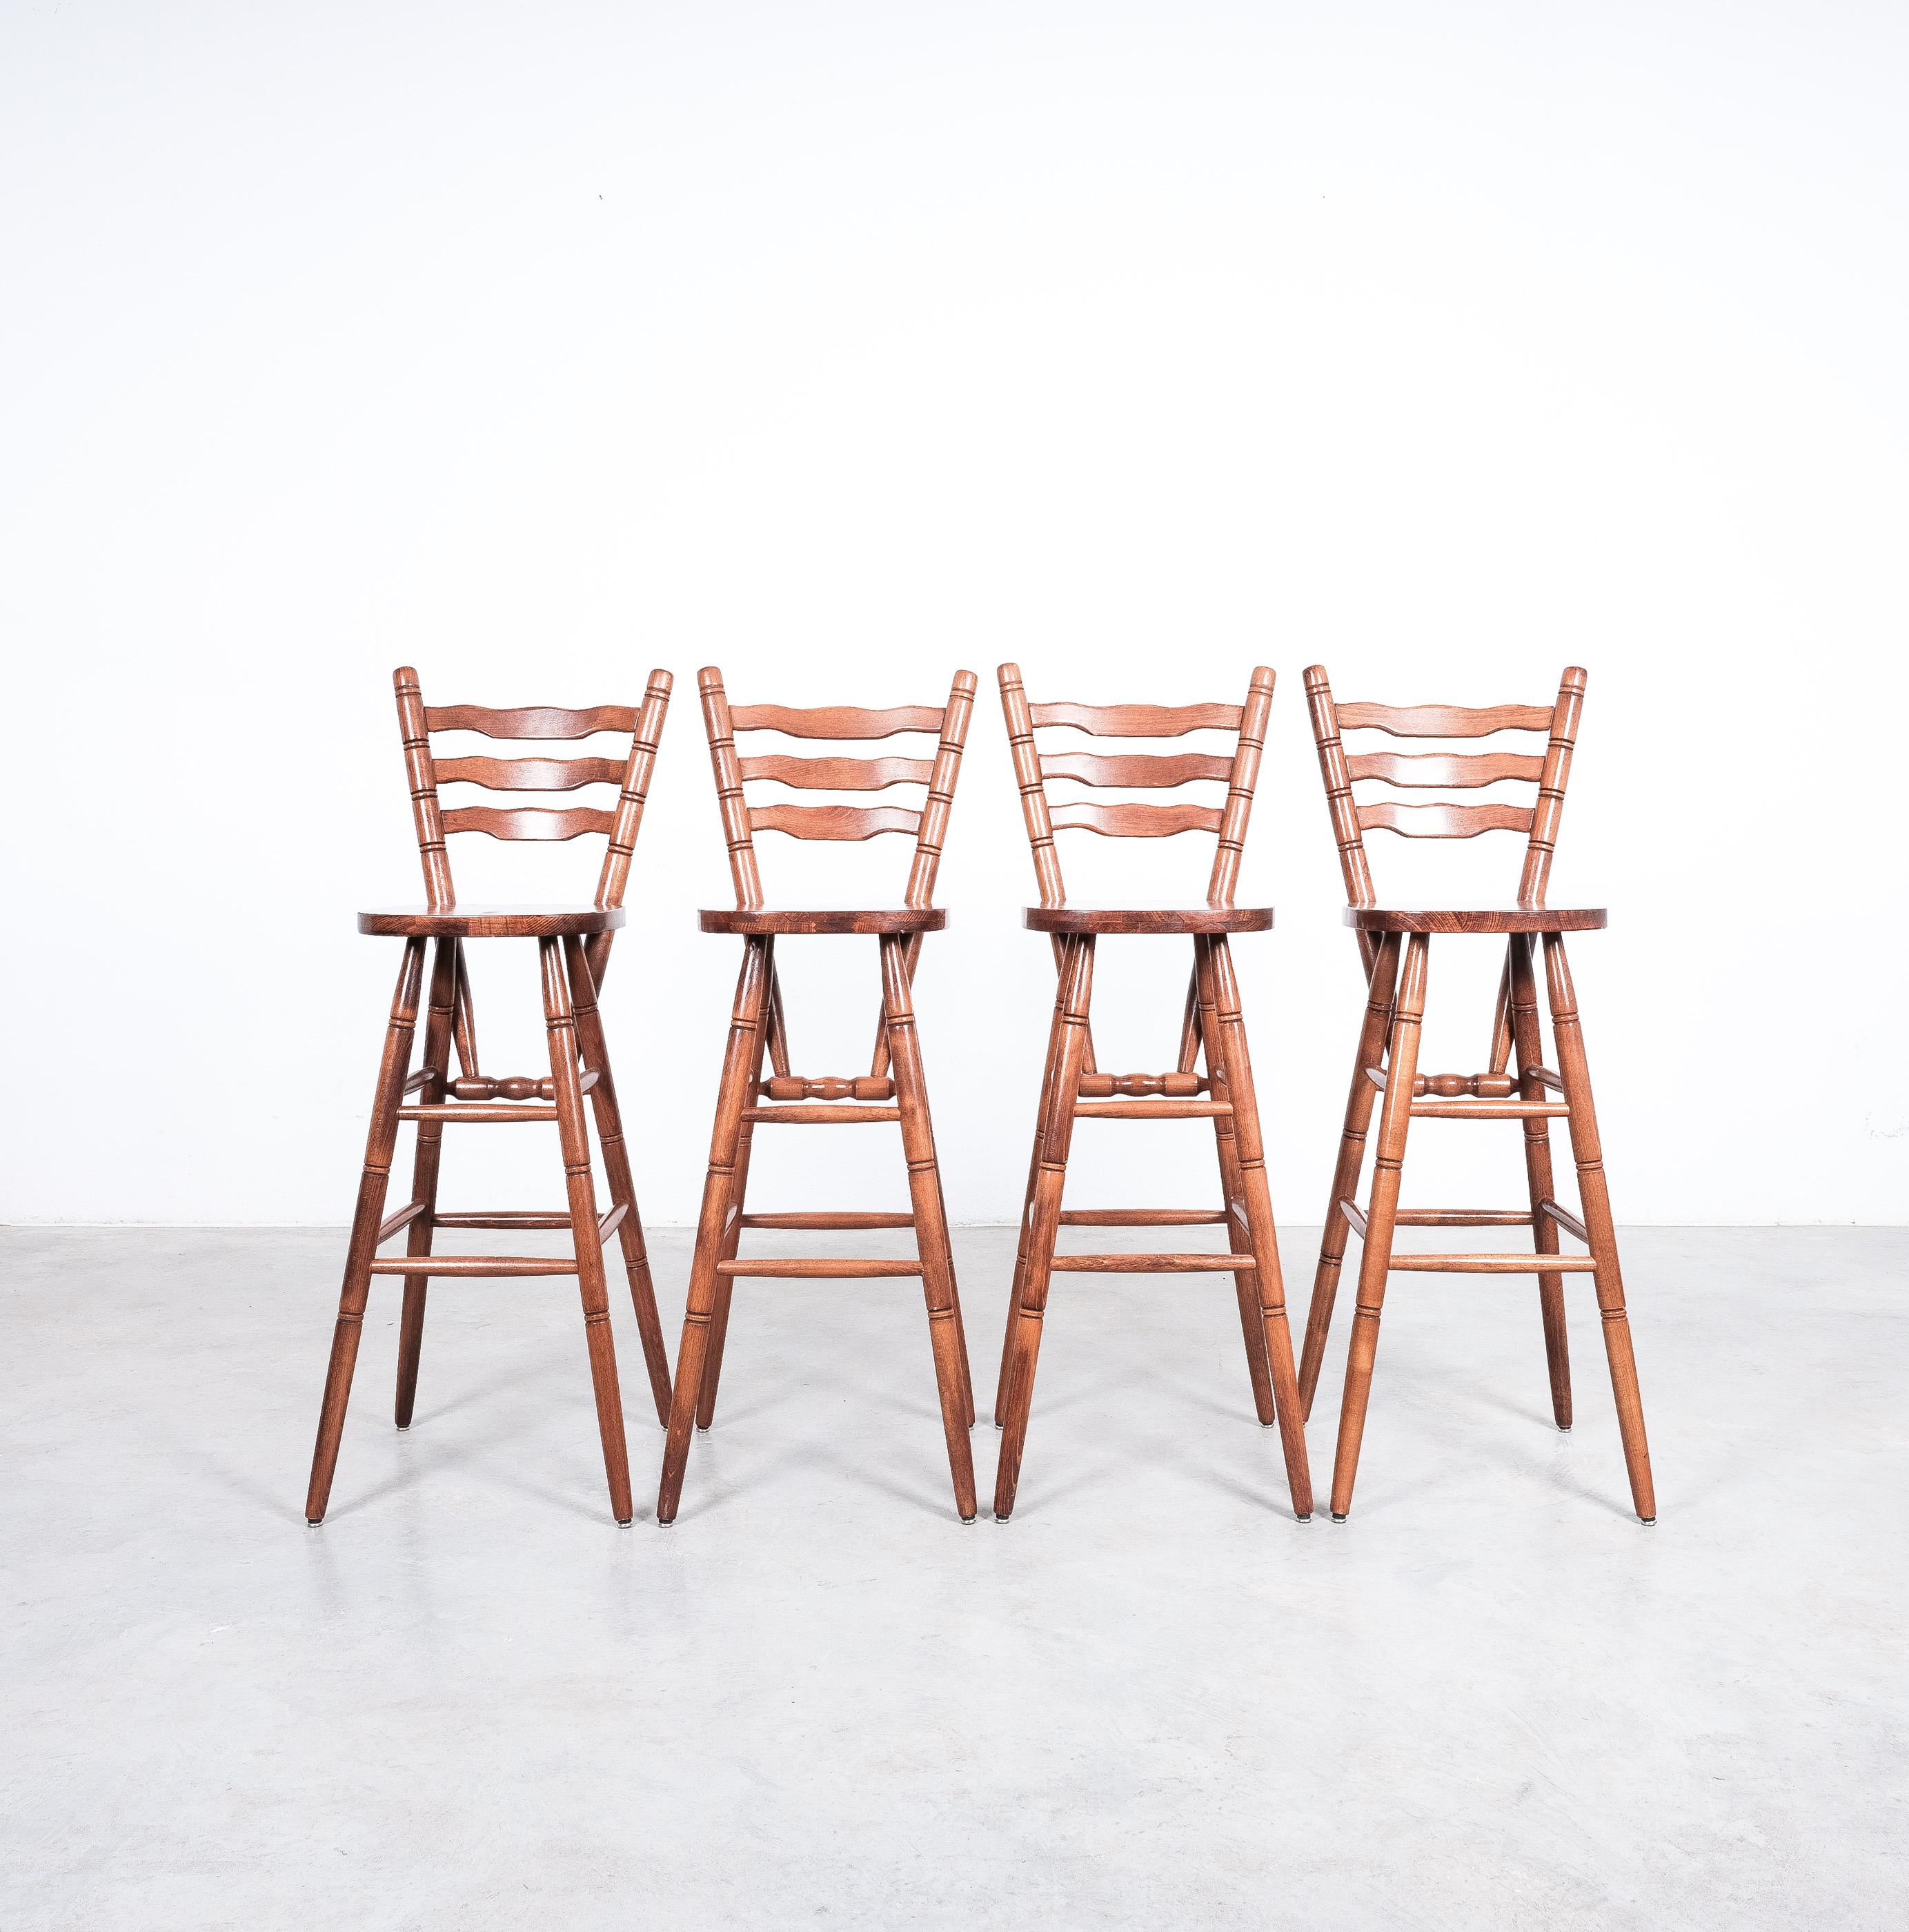 Rustic bar stools (Four available) made from birch, circa 1970 - priced per stool.

Dimensions 44